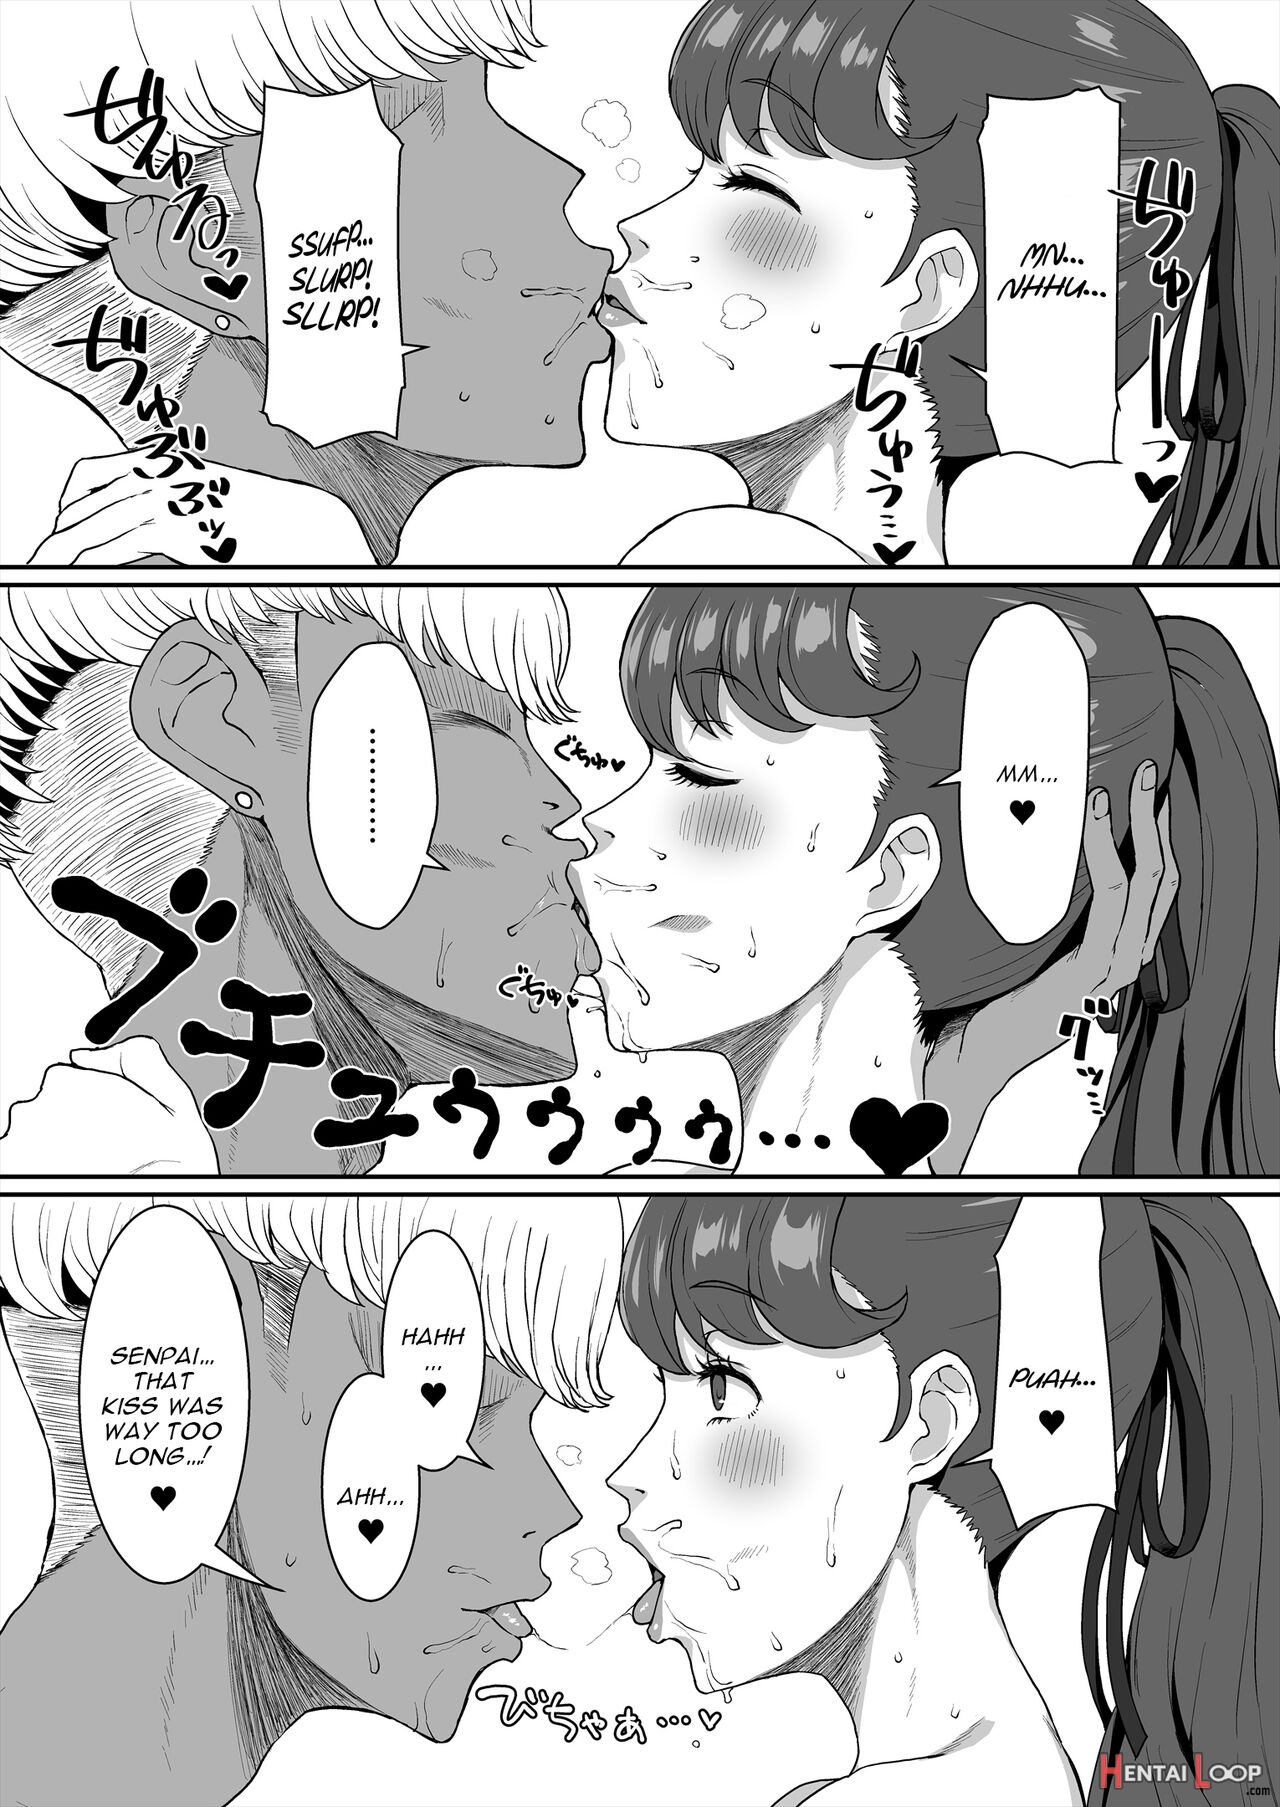 The Other Senpai page 6